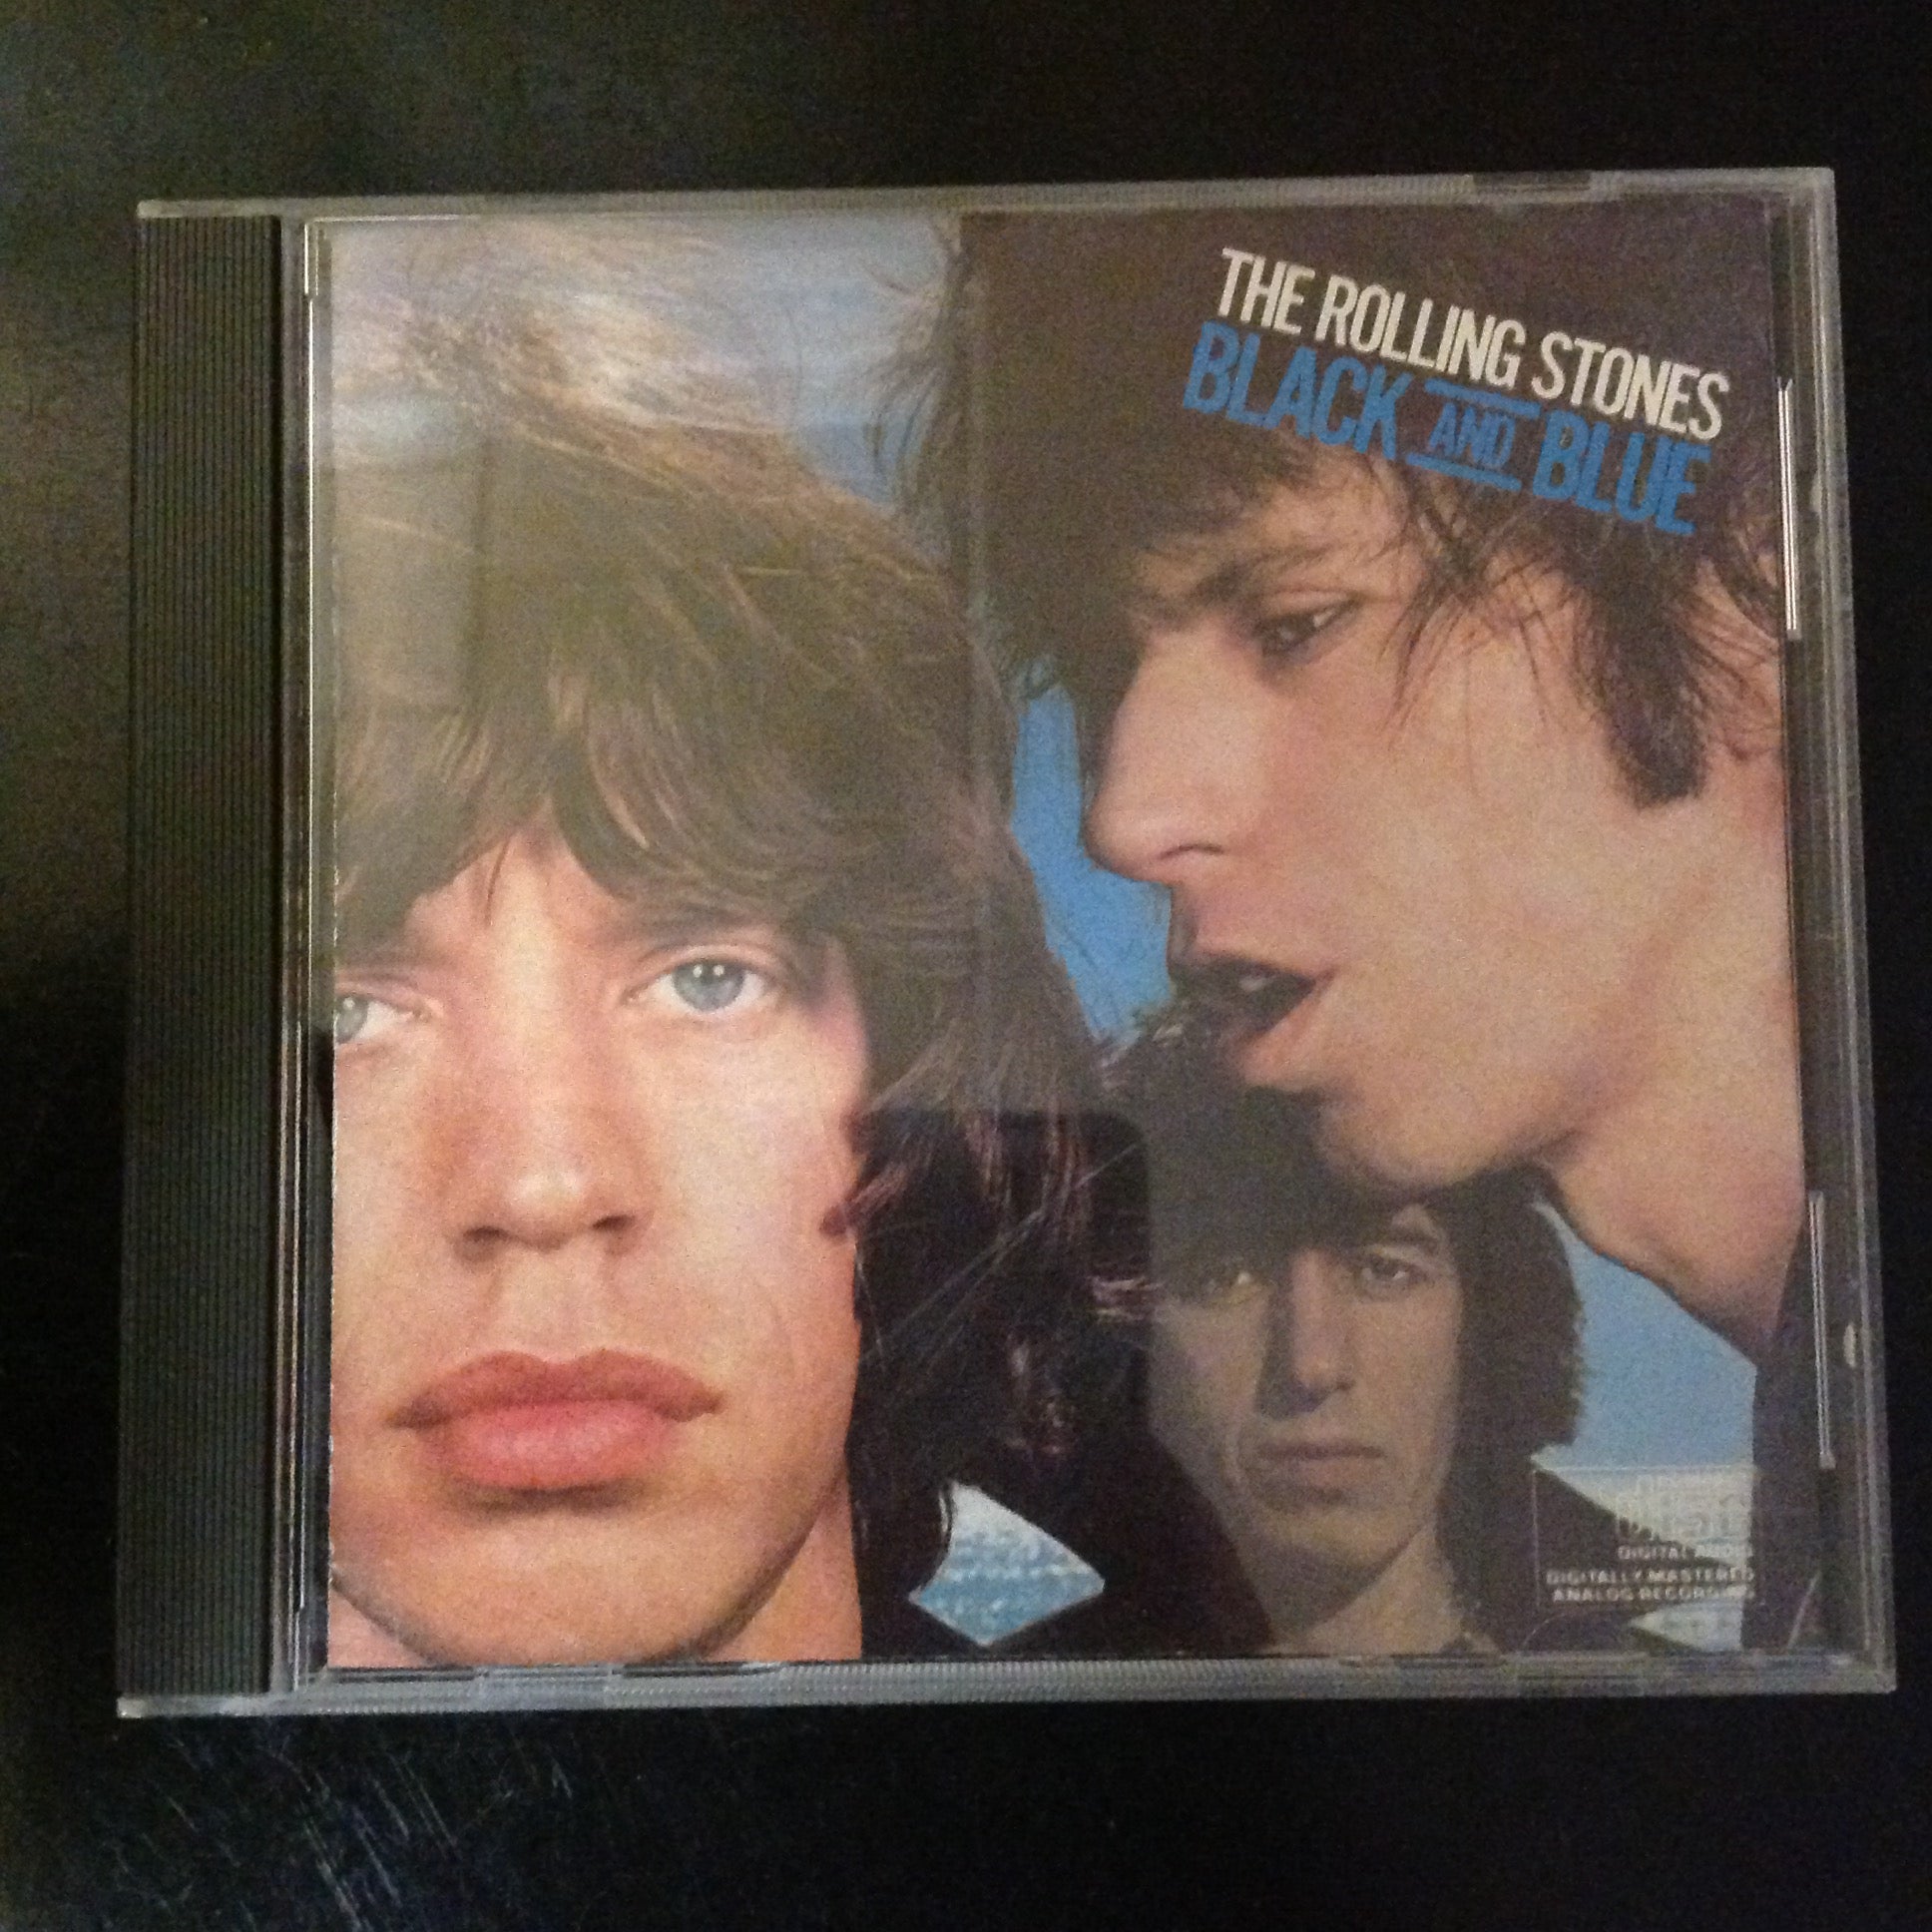 CD The Rolling Stones Black and Blue CK 40495 Rolling Stones Records